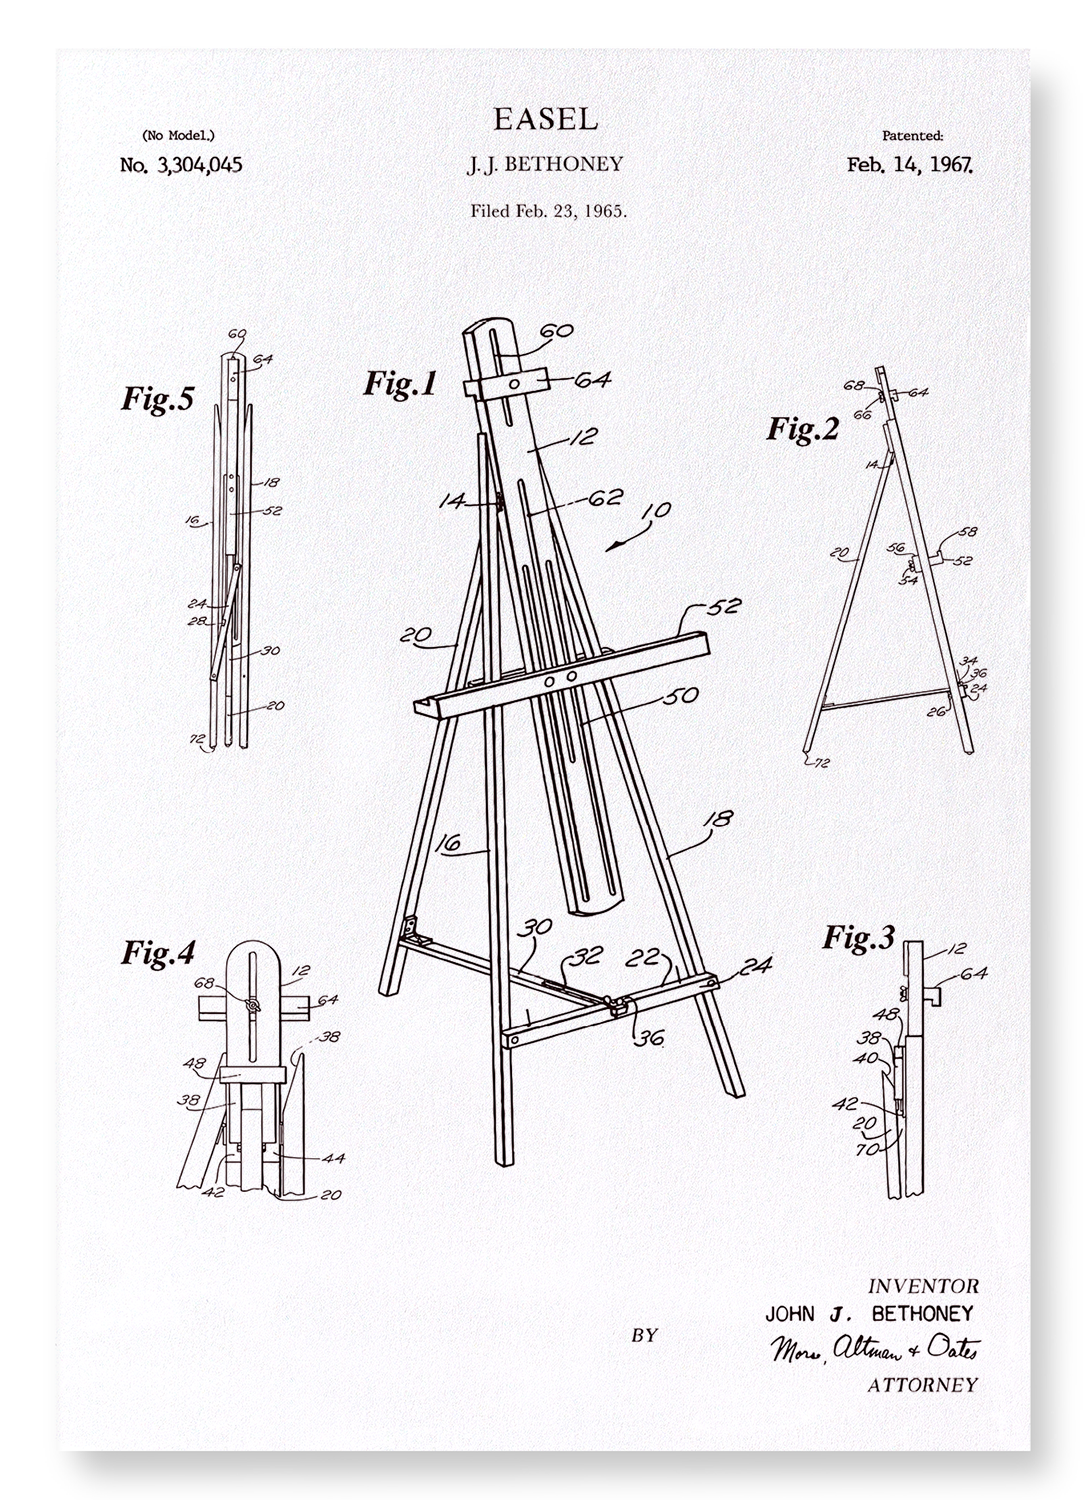 PATENT OF EASEL (1967)